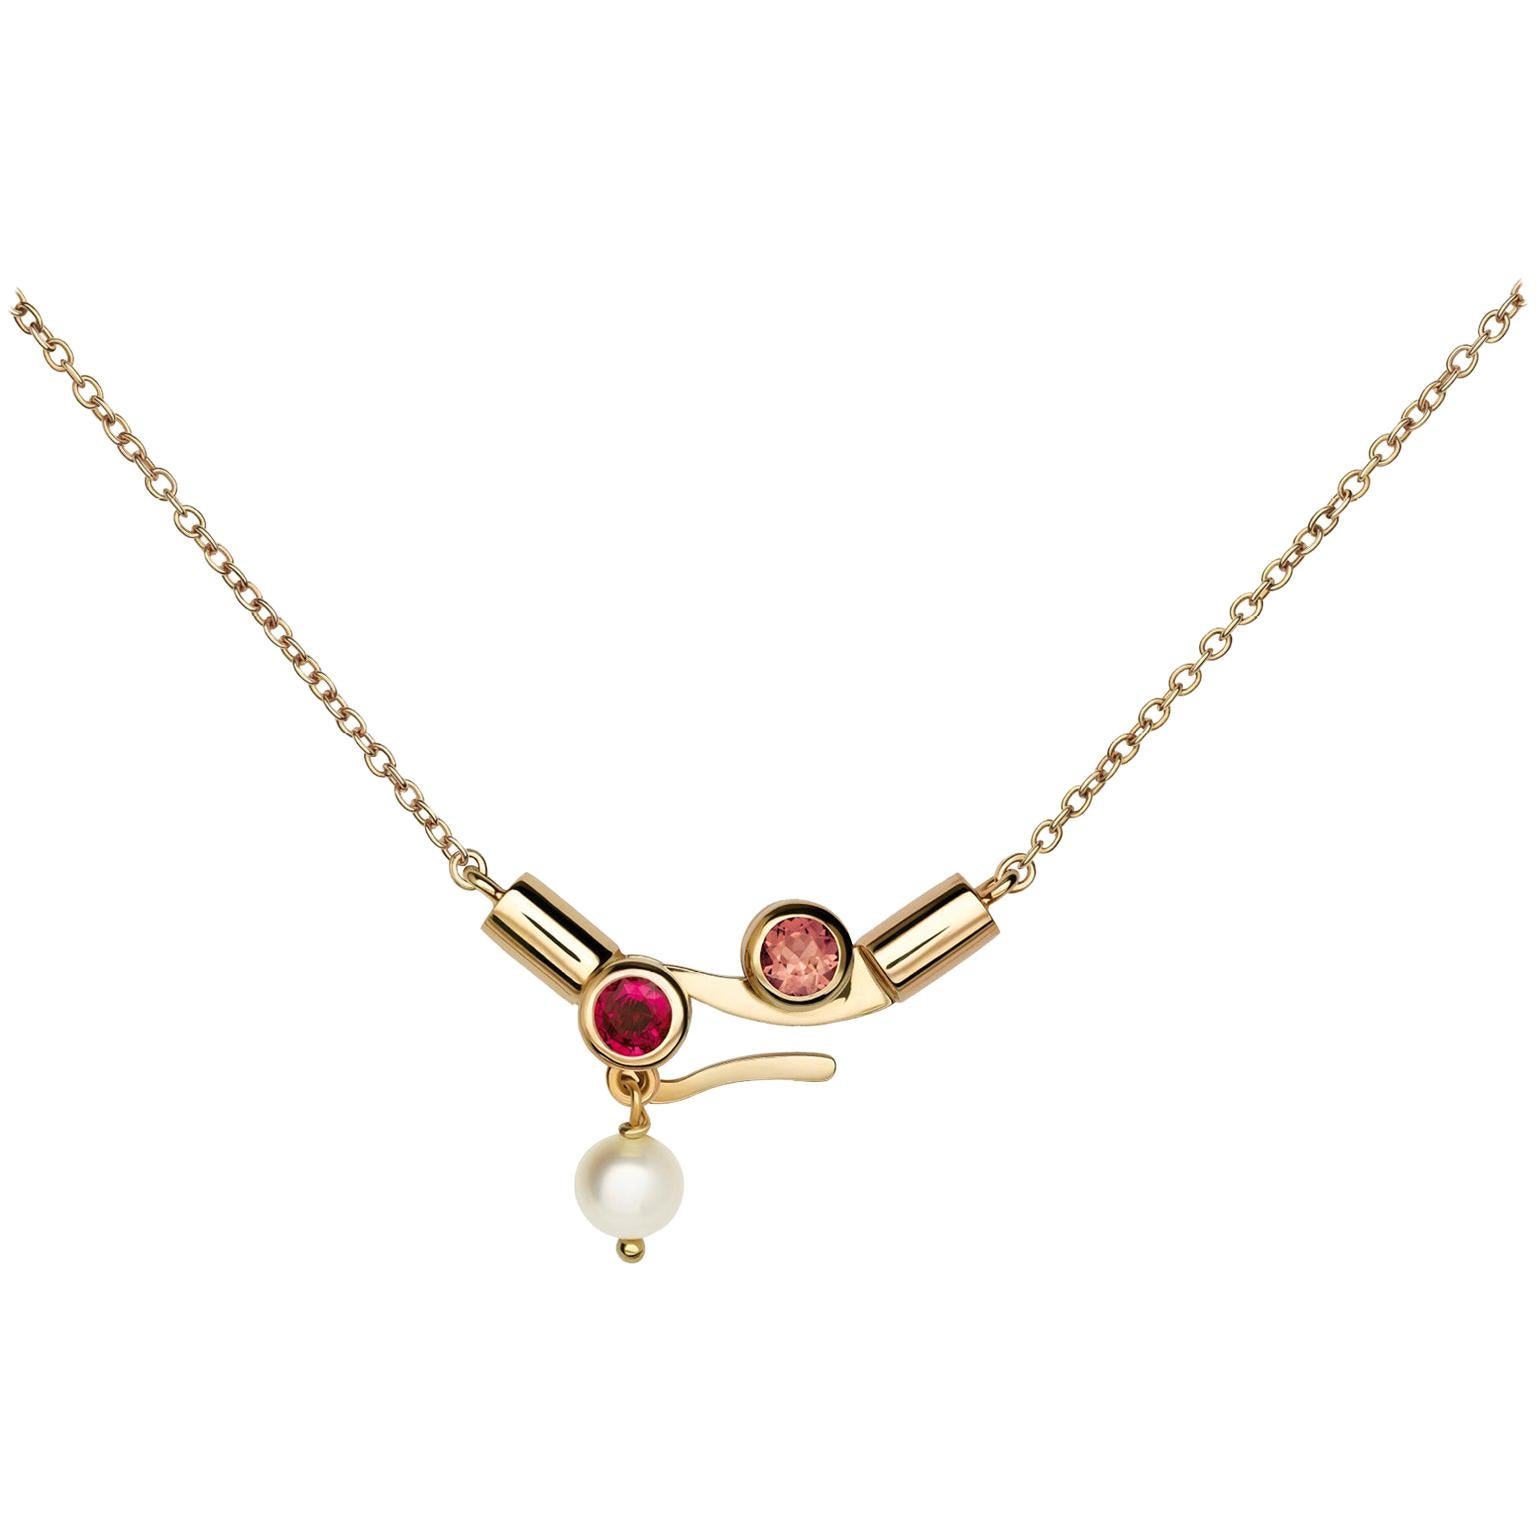 Nathalie Jean Contemporary Ruby Tourmaline Pearl Gold Pendant Drop Necklace